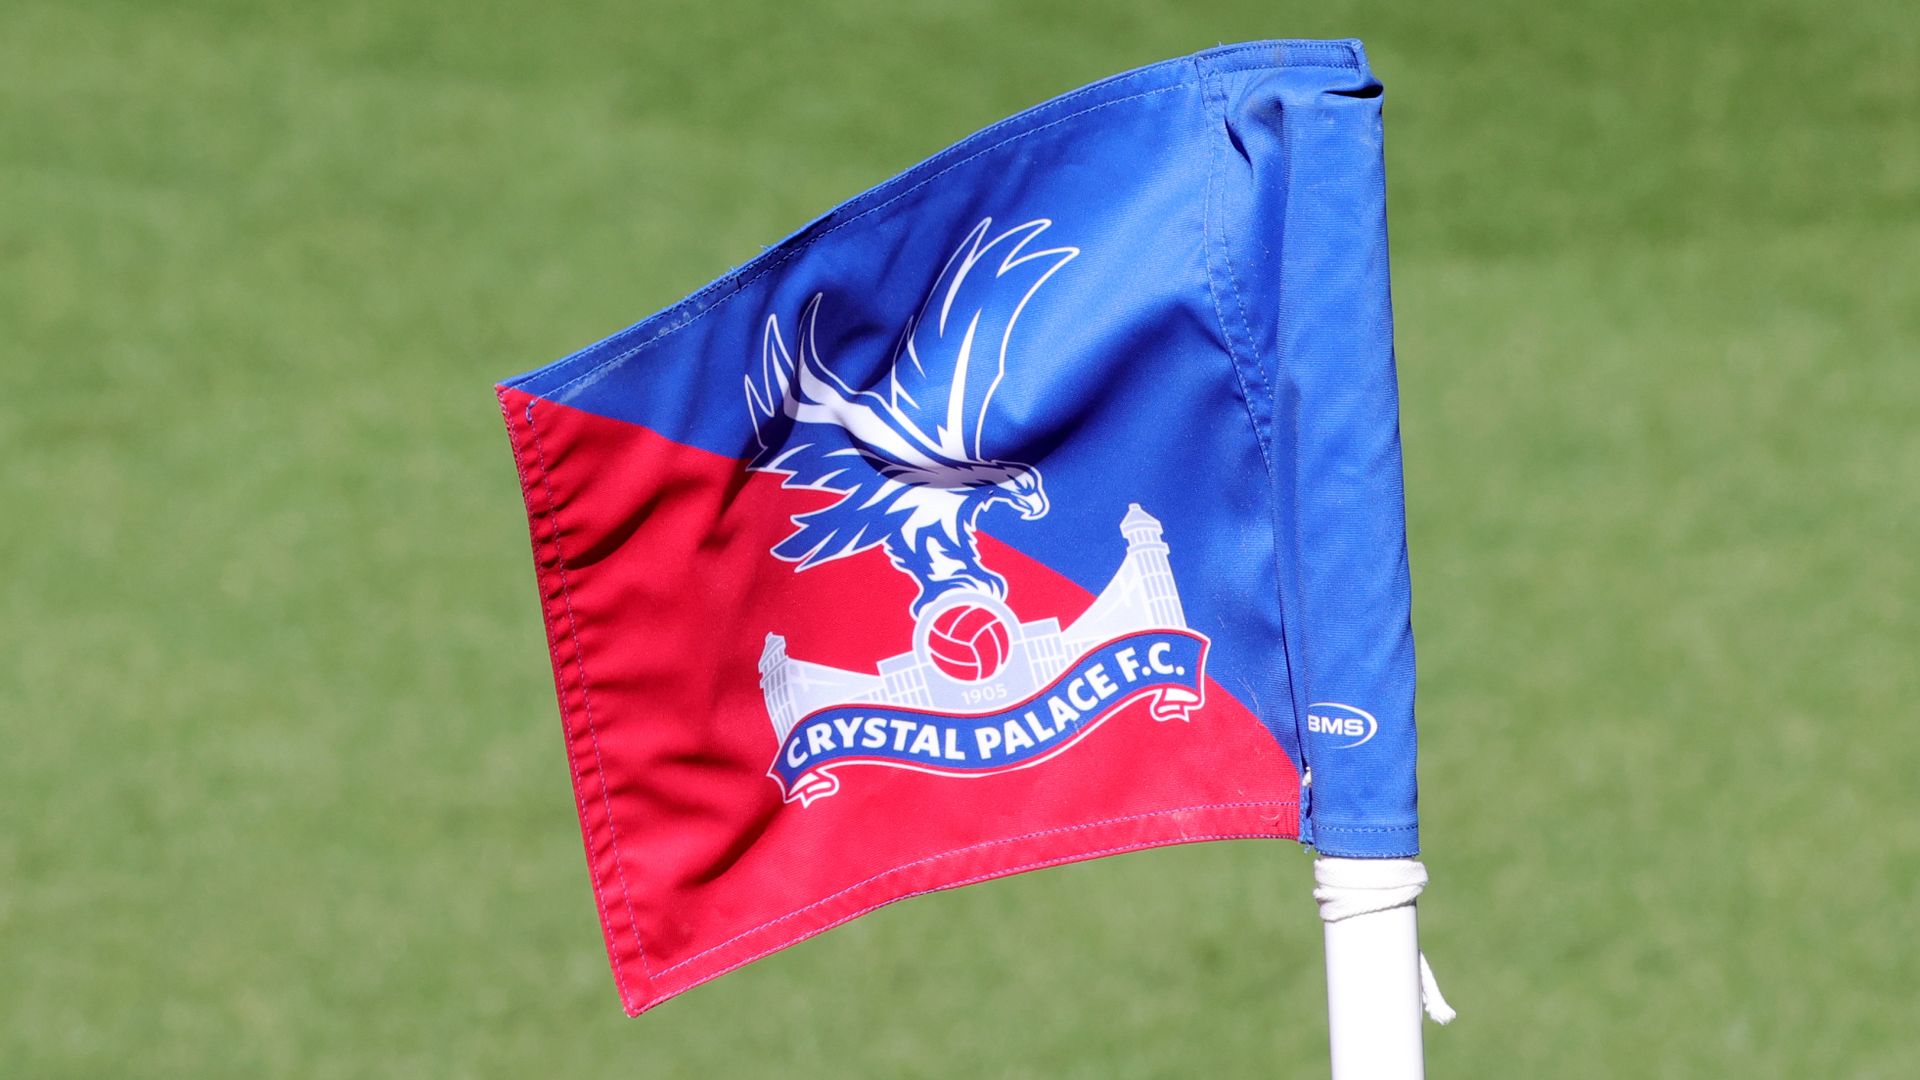 Crystal Palace scout criticised for 'lazy racist stereotyping' of Asians